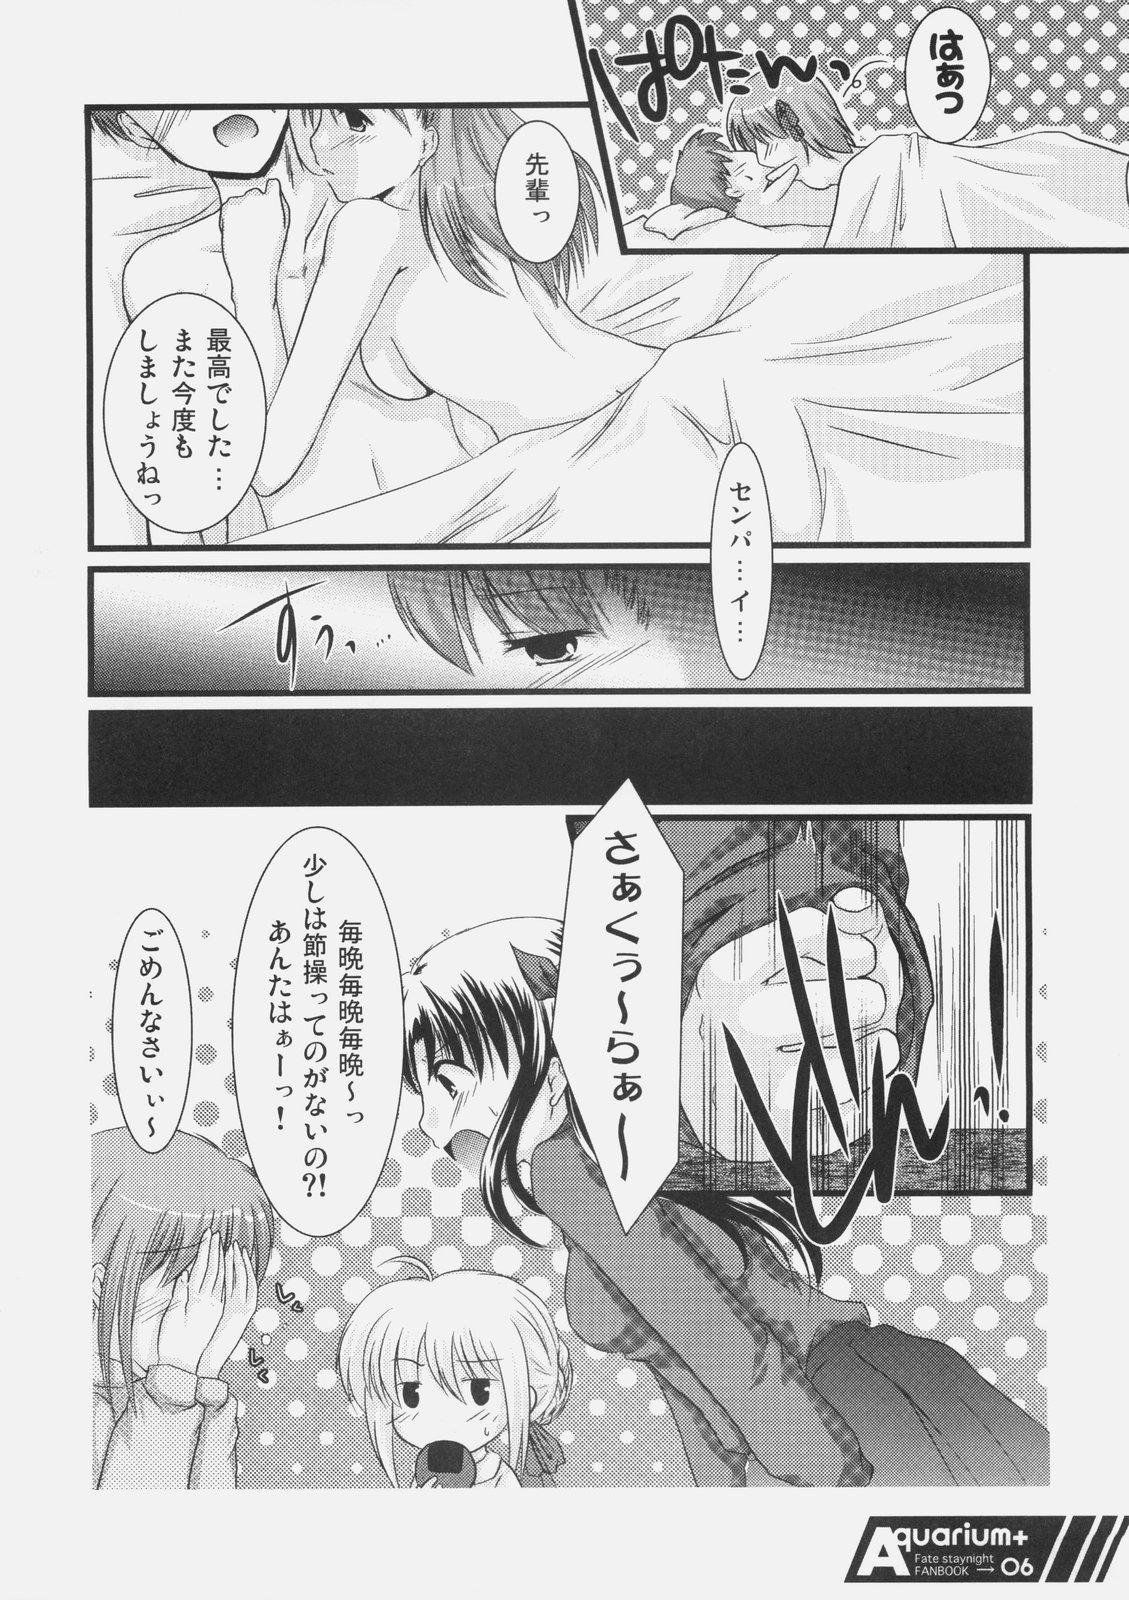 Young Petite Porn Aquarium+ - Fate stay night Couple Porn - Page 5